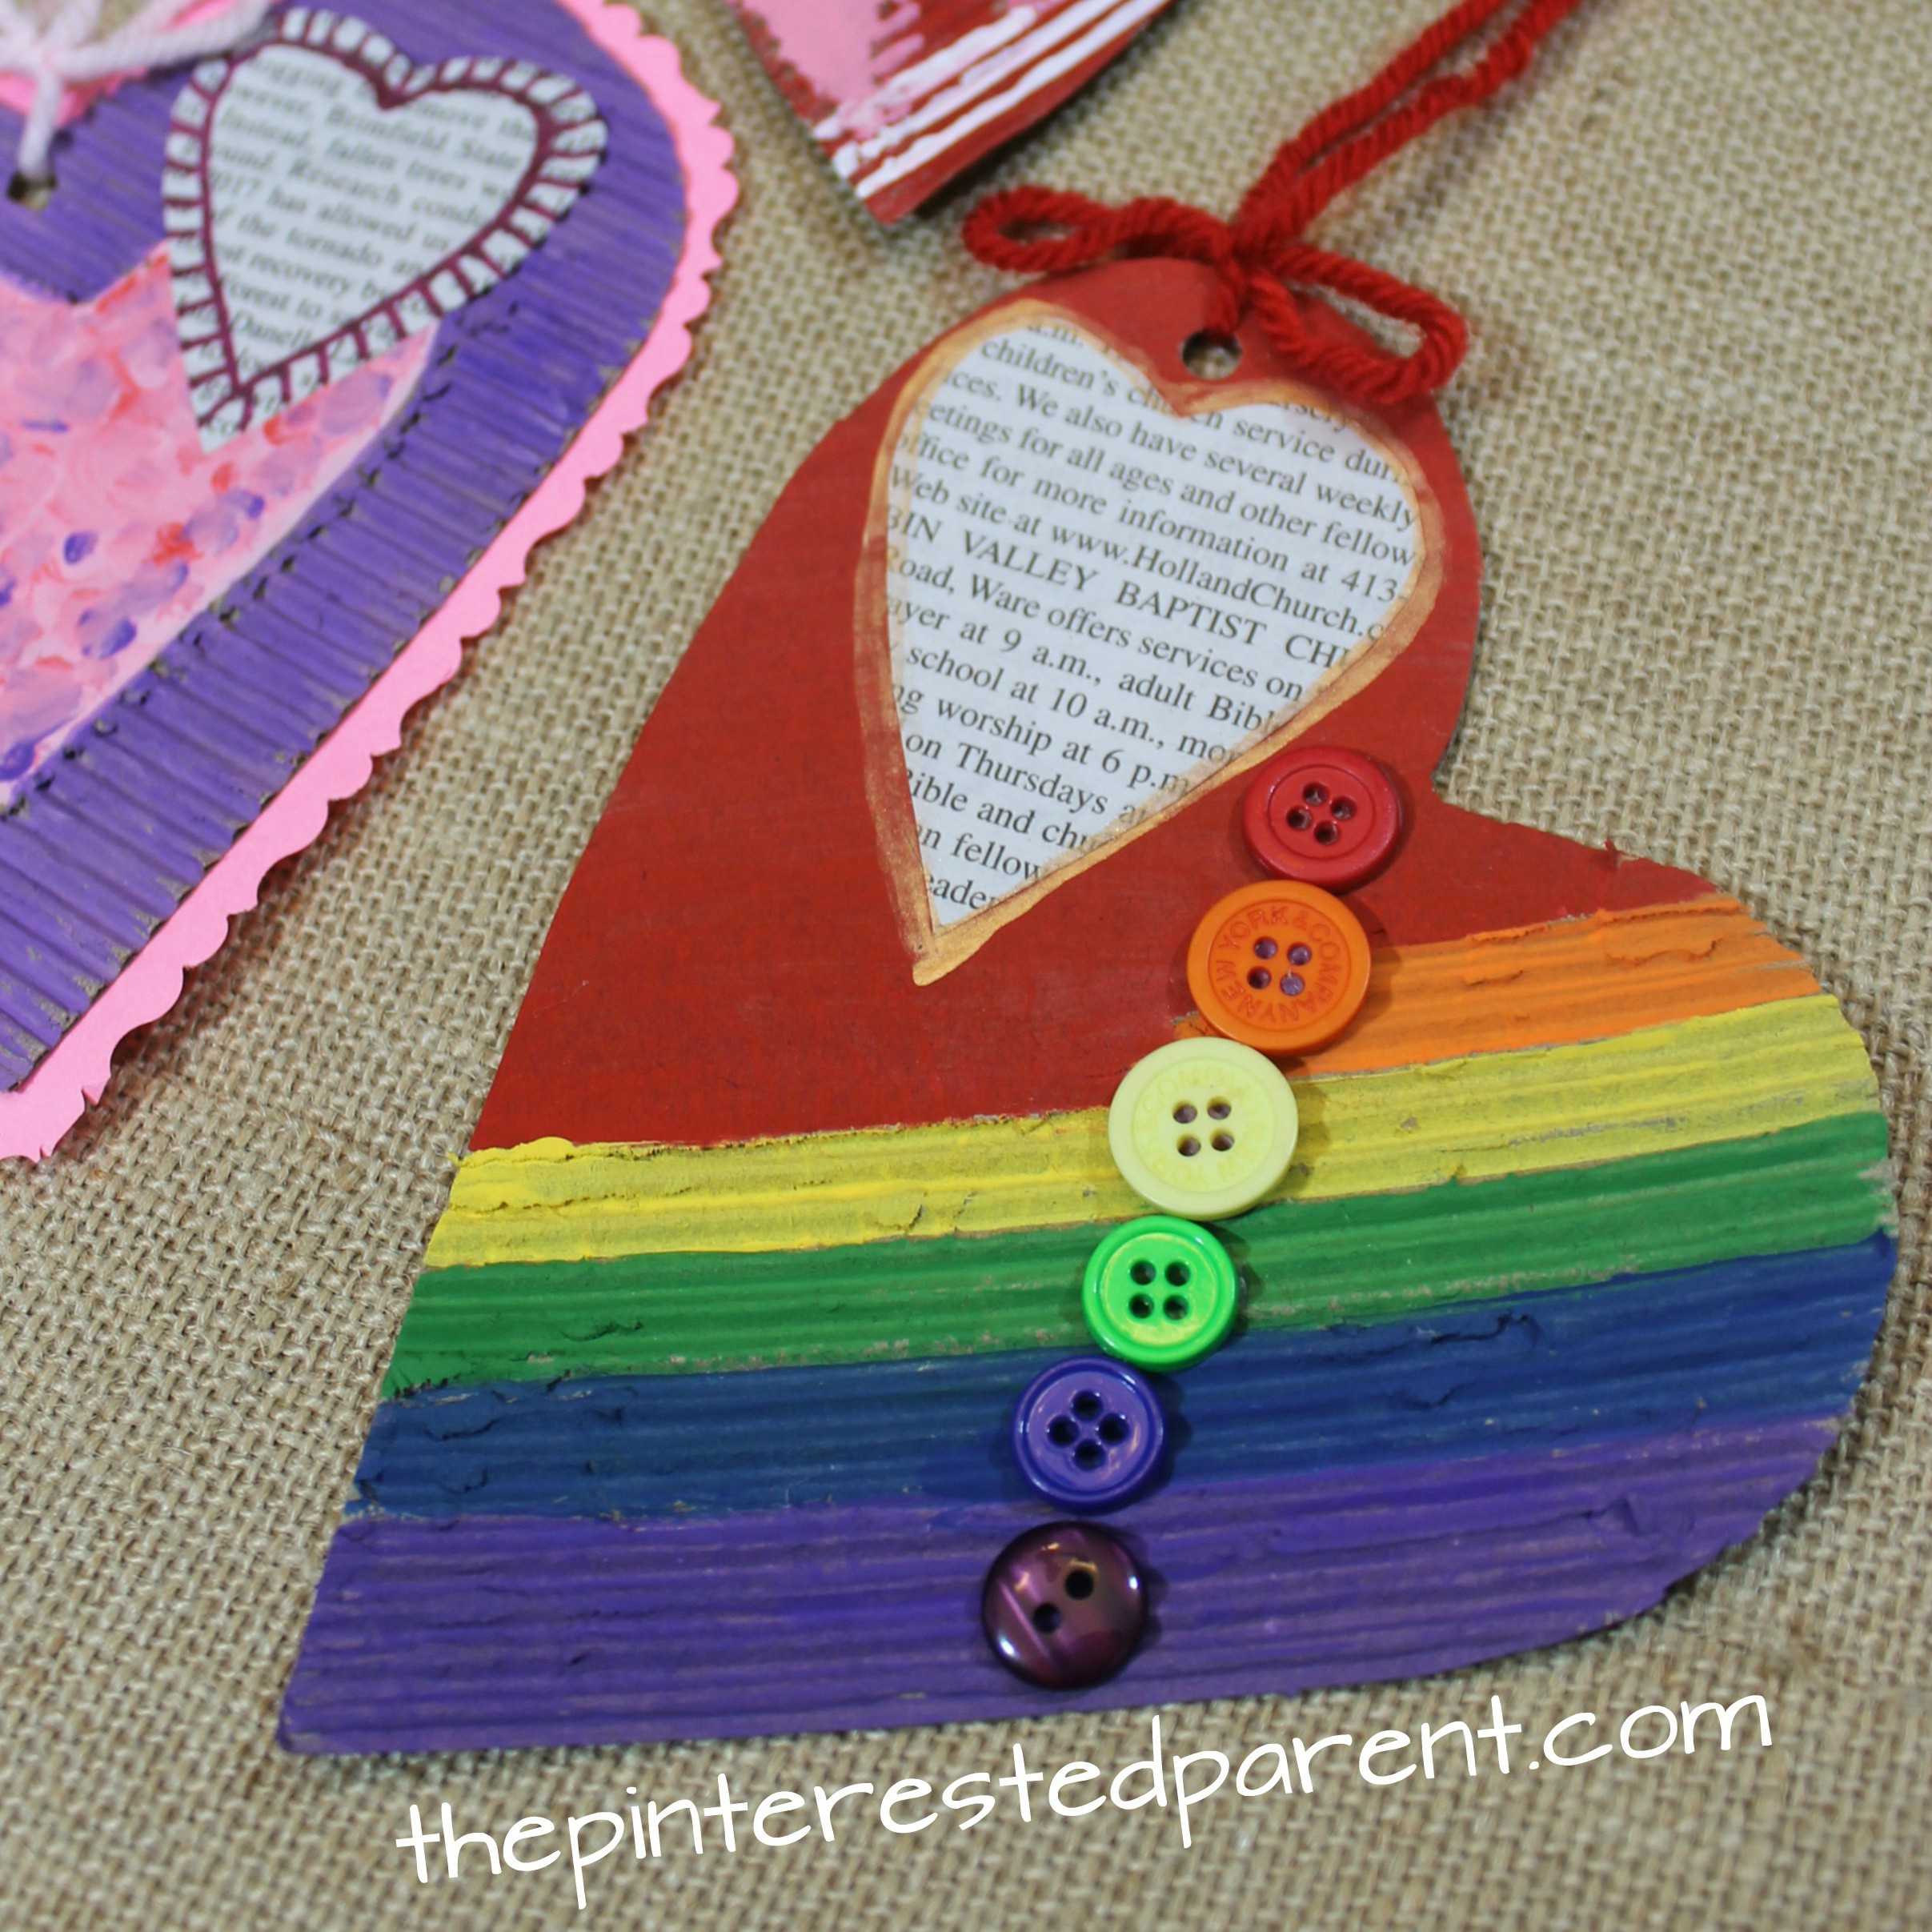 Mixed media corrugated cardboard hearts. Valentine's arts and crafts for kids.